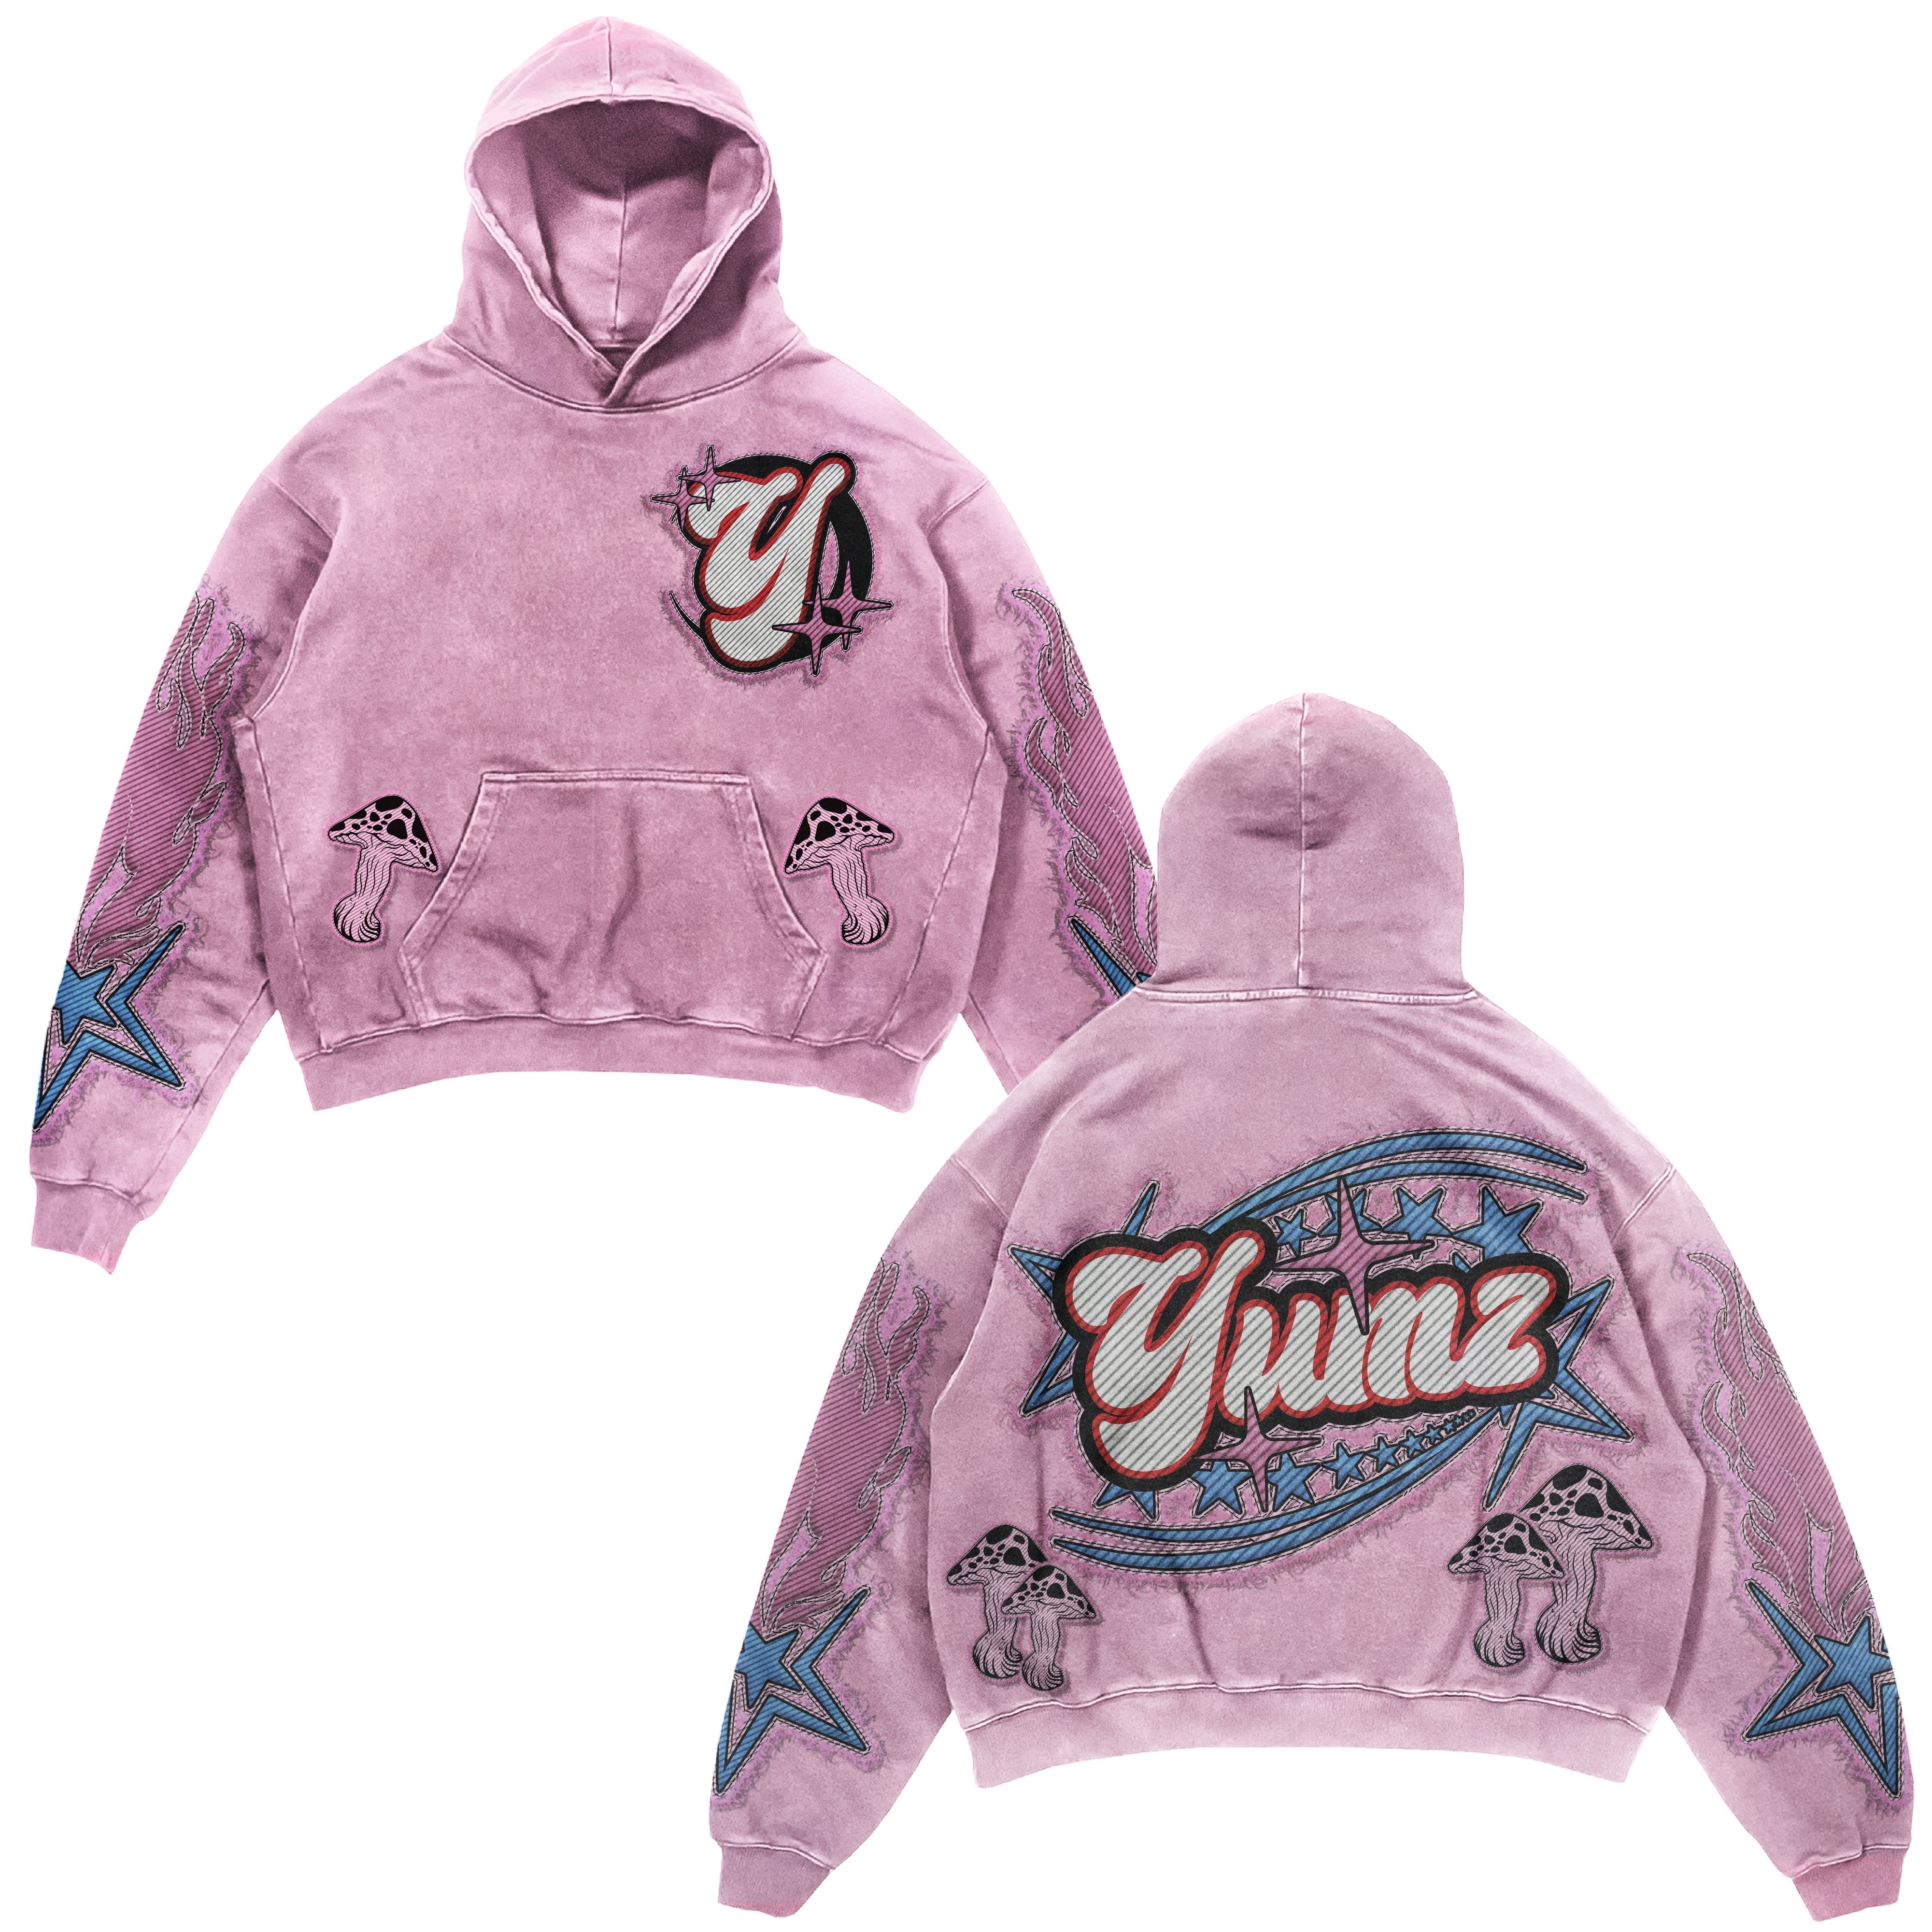 YUMZ HOODIE ( LIMITED EDITION ) Best Price